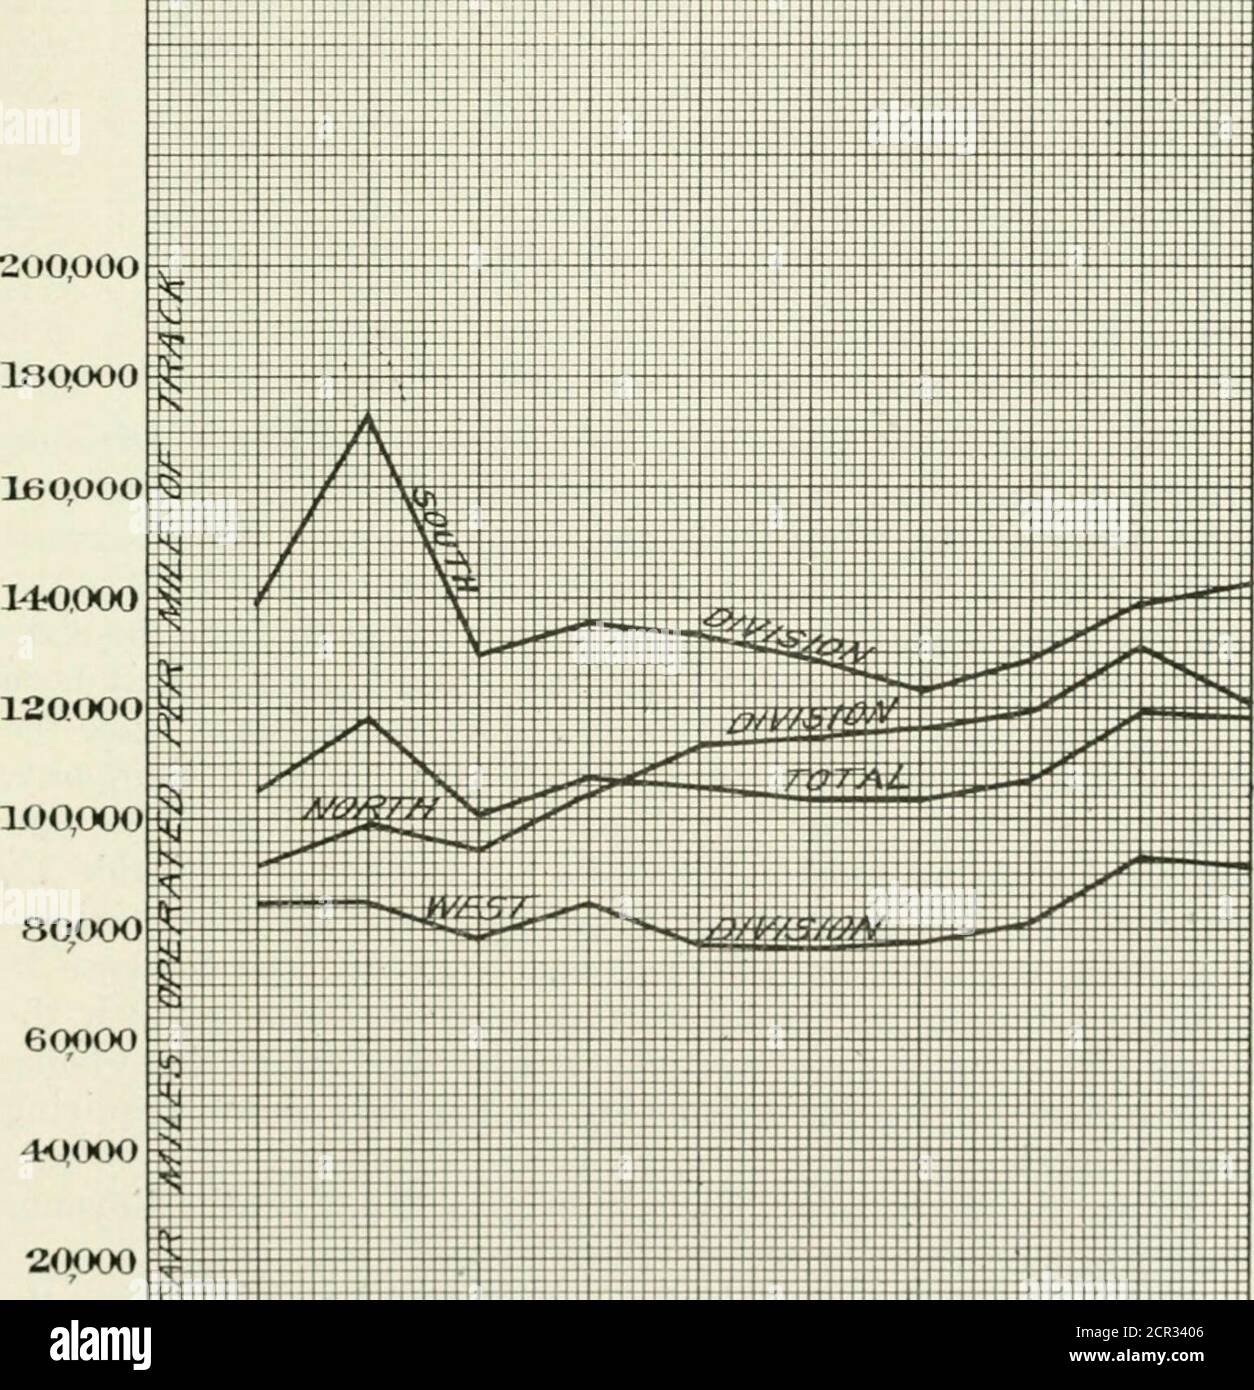 . Report on the engineering and operating features of the Chicago transportation problem . 5 3 1- It. IK I. li 73 THE CHICAGO TRANSPORTATION PROBLEM Table No. 12—shown graphically in Figure 11—gives theGross Receipts per mile operated per year in Divisions for thepast ten years. TABLE NO. 12.Gross Receipts Per Mile Operated Per Year—Surface Lines. So. Div. No. Div. W. Div. Total. Rcpts. Rcpts. Rcpts. Rcpts. Per Mile Per Mile Per Mile Per Mile Year. Cents. Cents. Cents. Cents. 1892 21.13 29.50 29.43 25.60 1893 23.04 32.68 30.90 27.27 1894 20.26 28.19 26.43 23.92 1895 20.40 27.78 24.71 23.38 189 Stock Photo